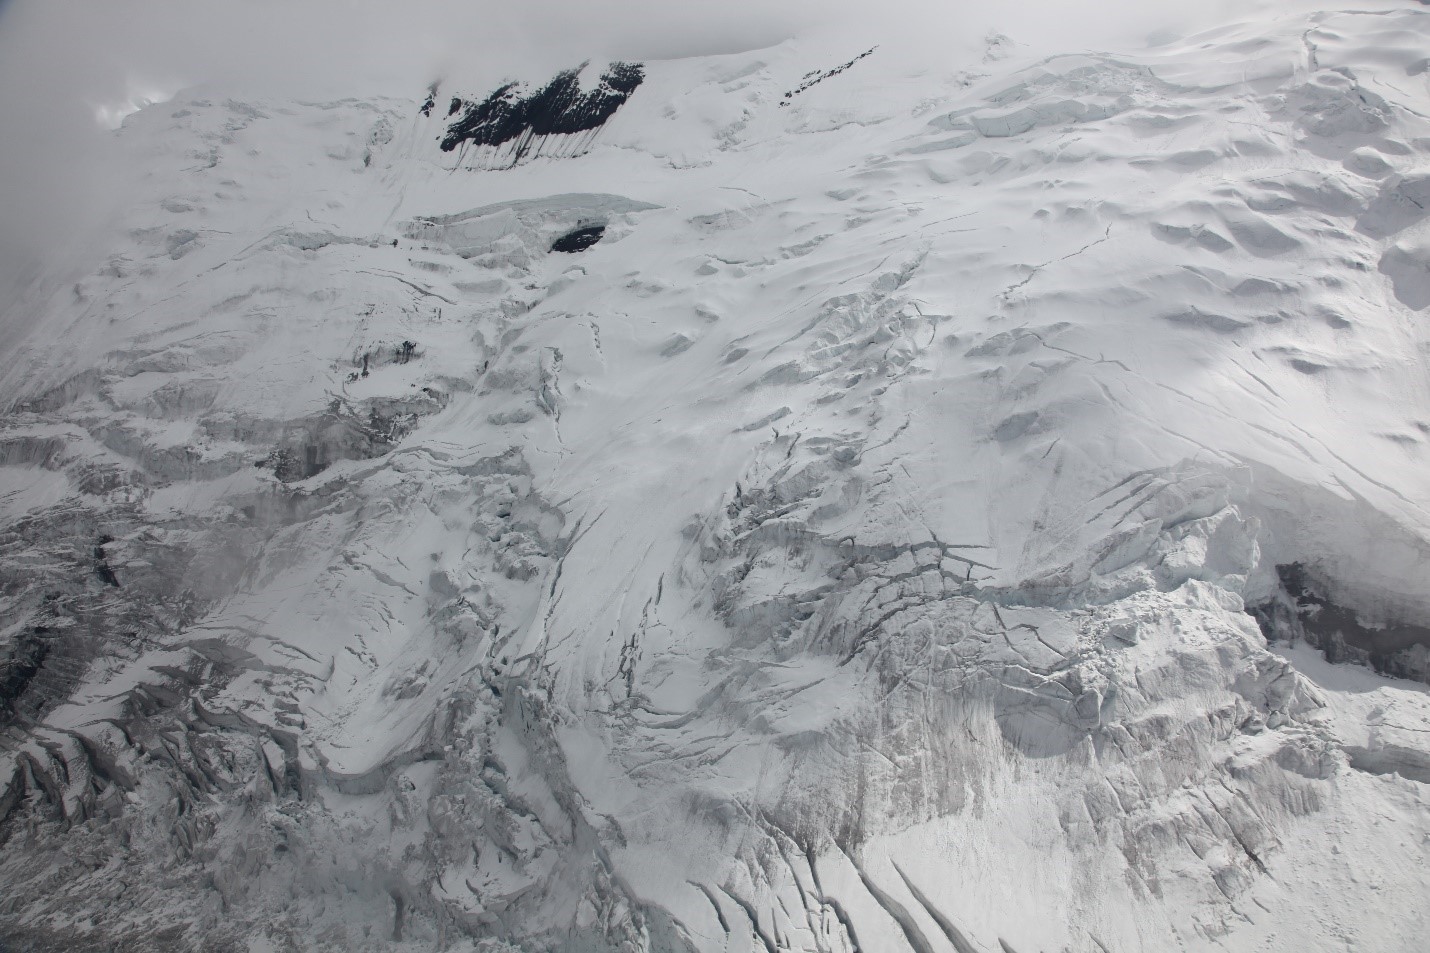 View of crevassed and snowy surface rising steeply upward from the lower glacier surface